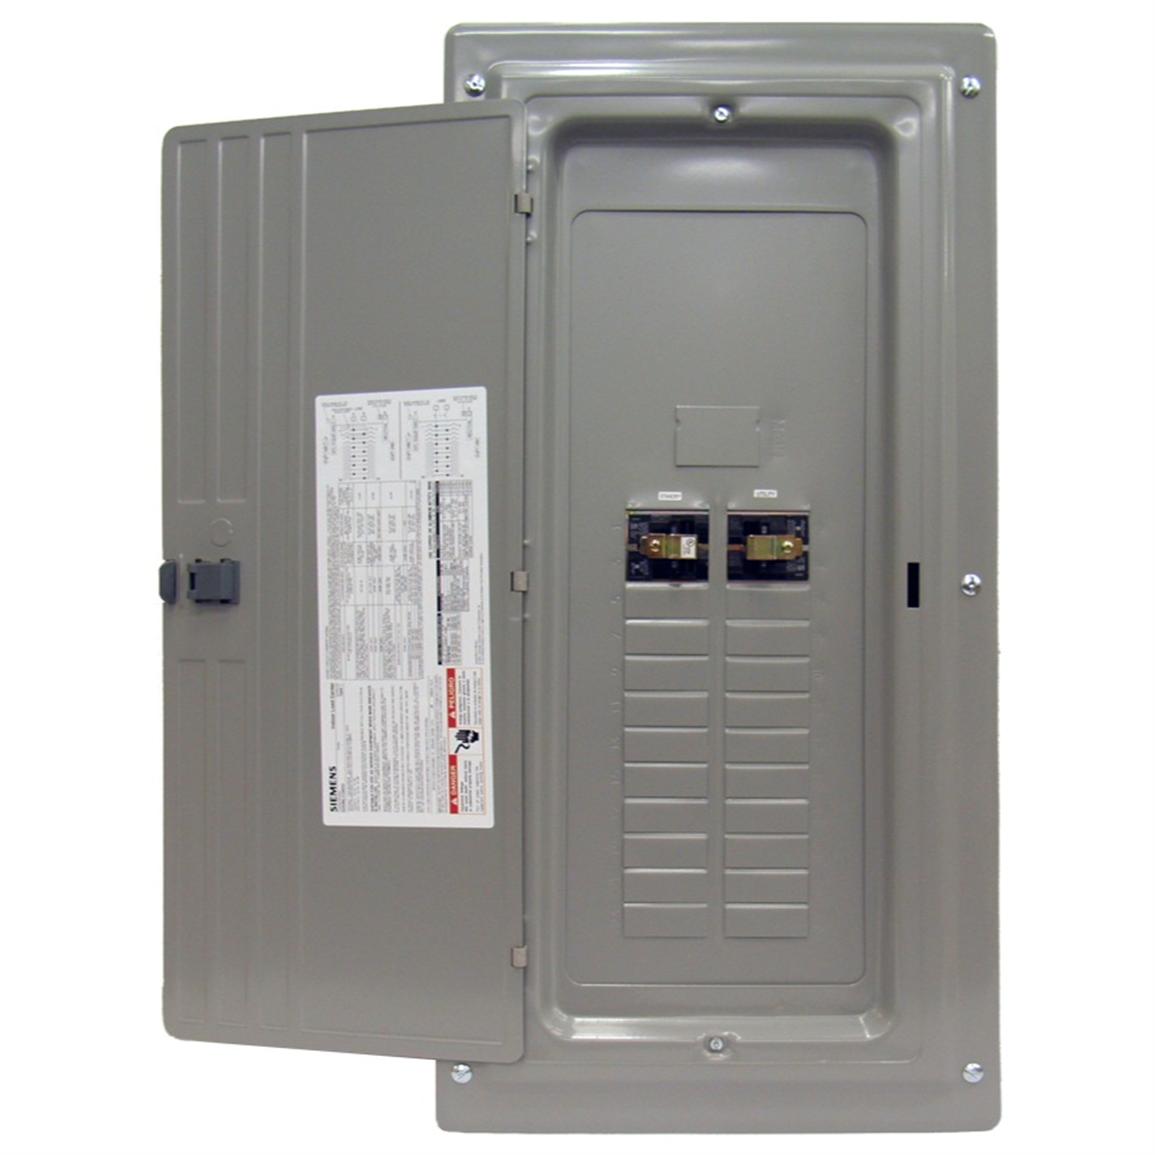 amp generator panel electric connecticut ready distribution power box spa inlet disconnect popscreen generators number